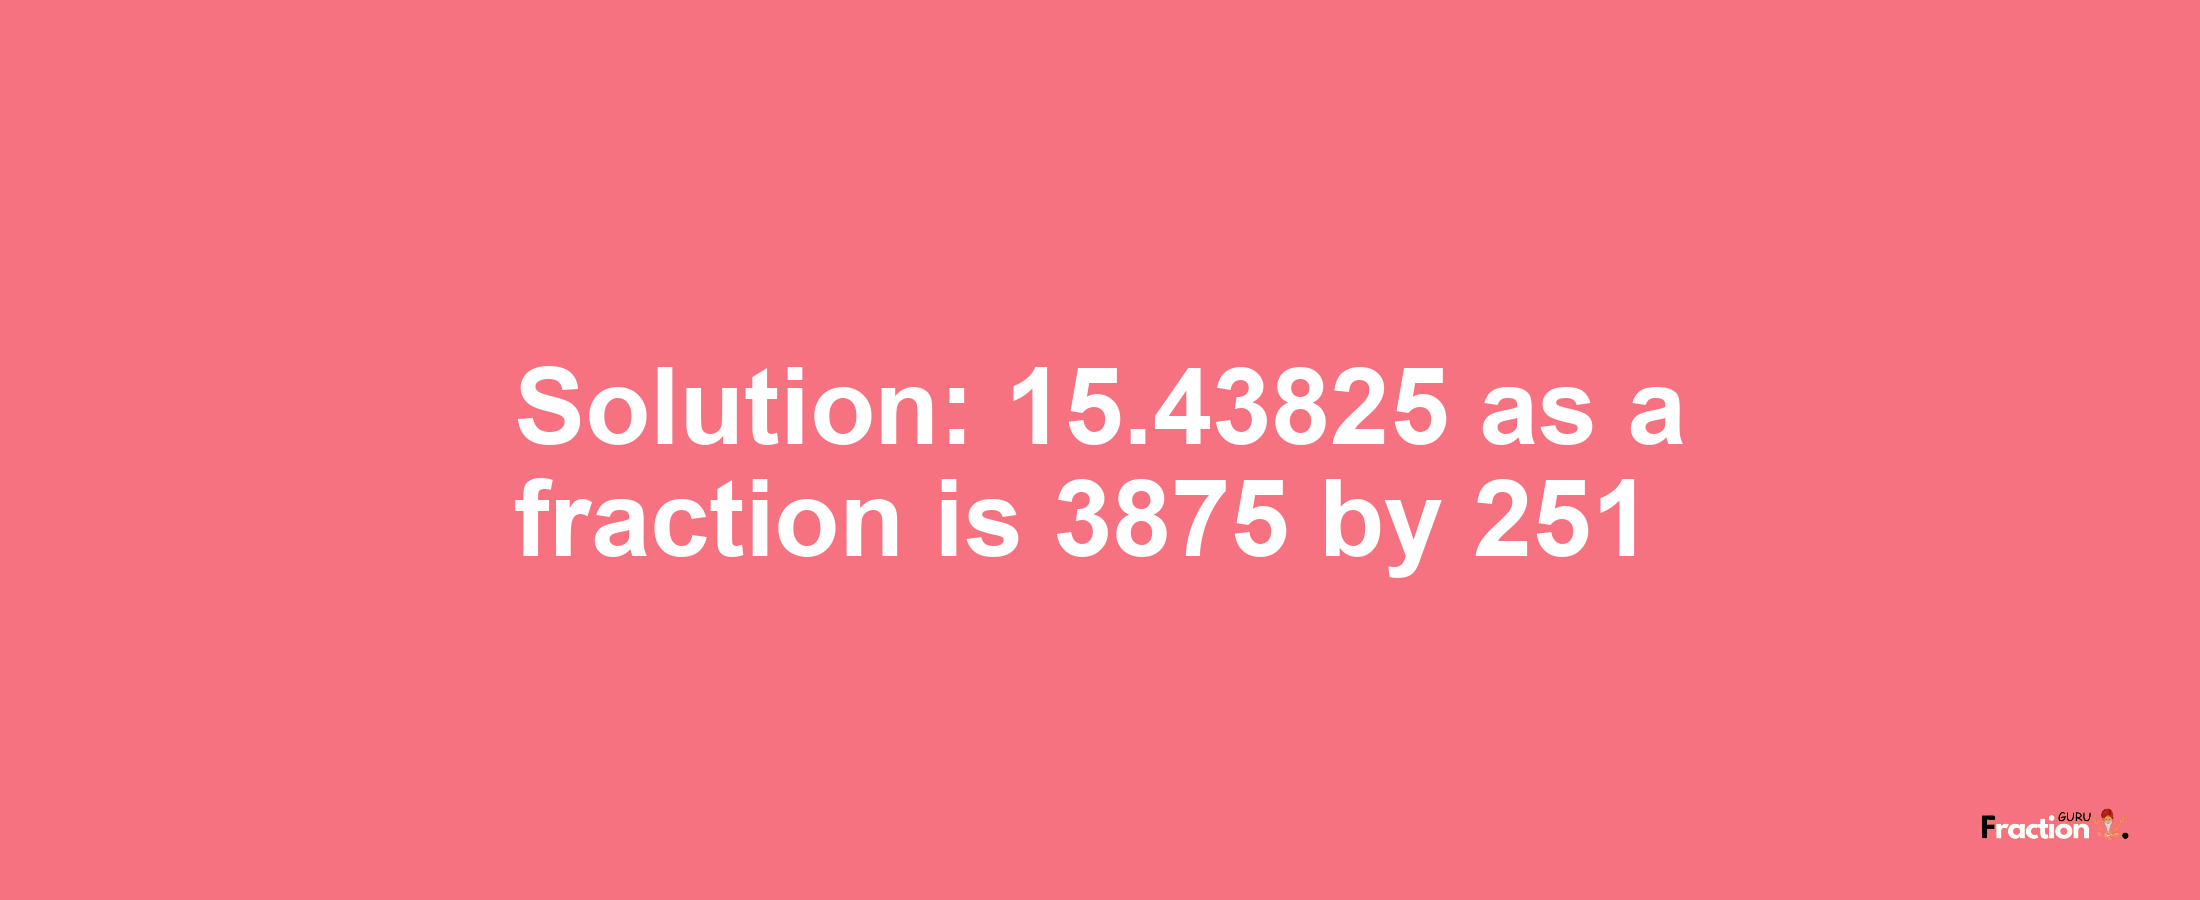 Solution:15.43825 as a fraction is 3875/251